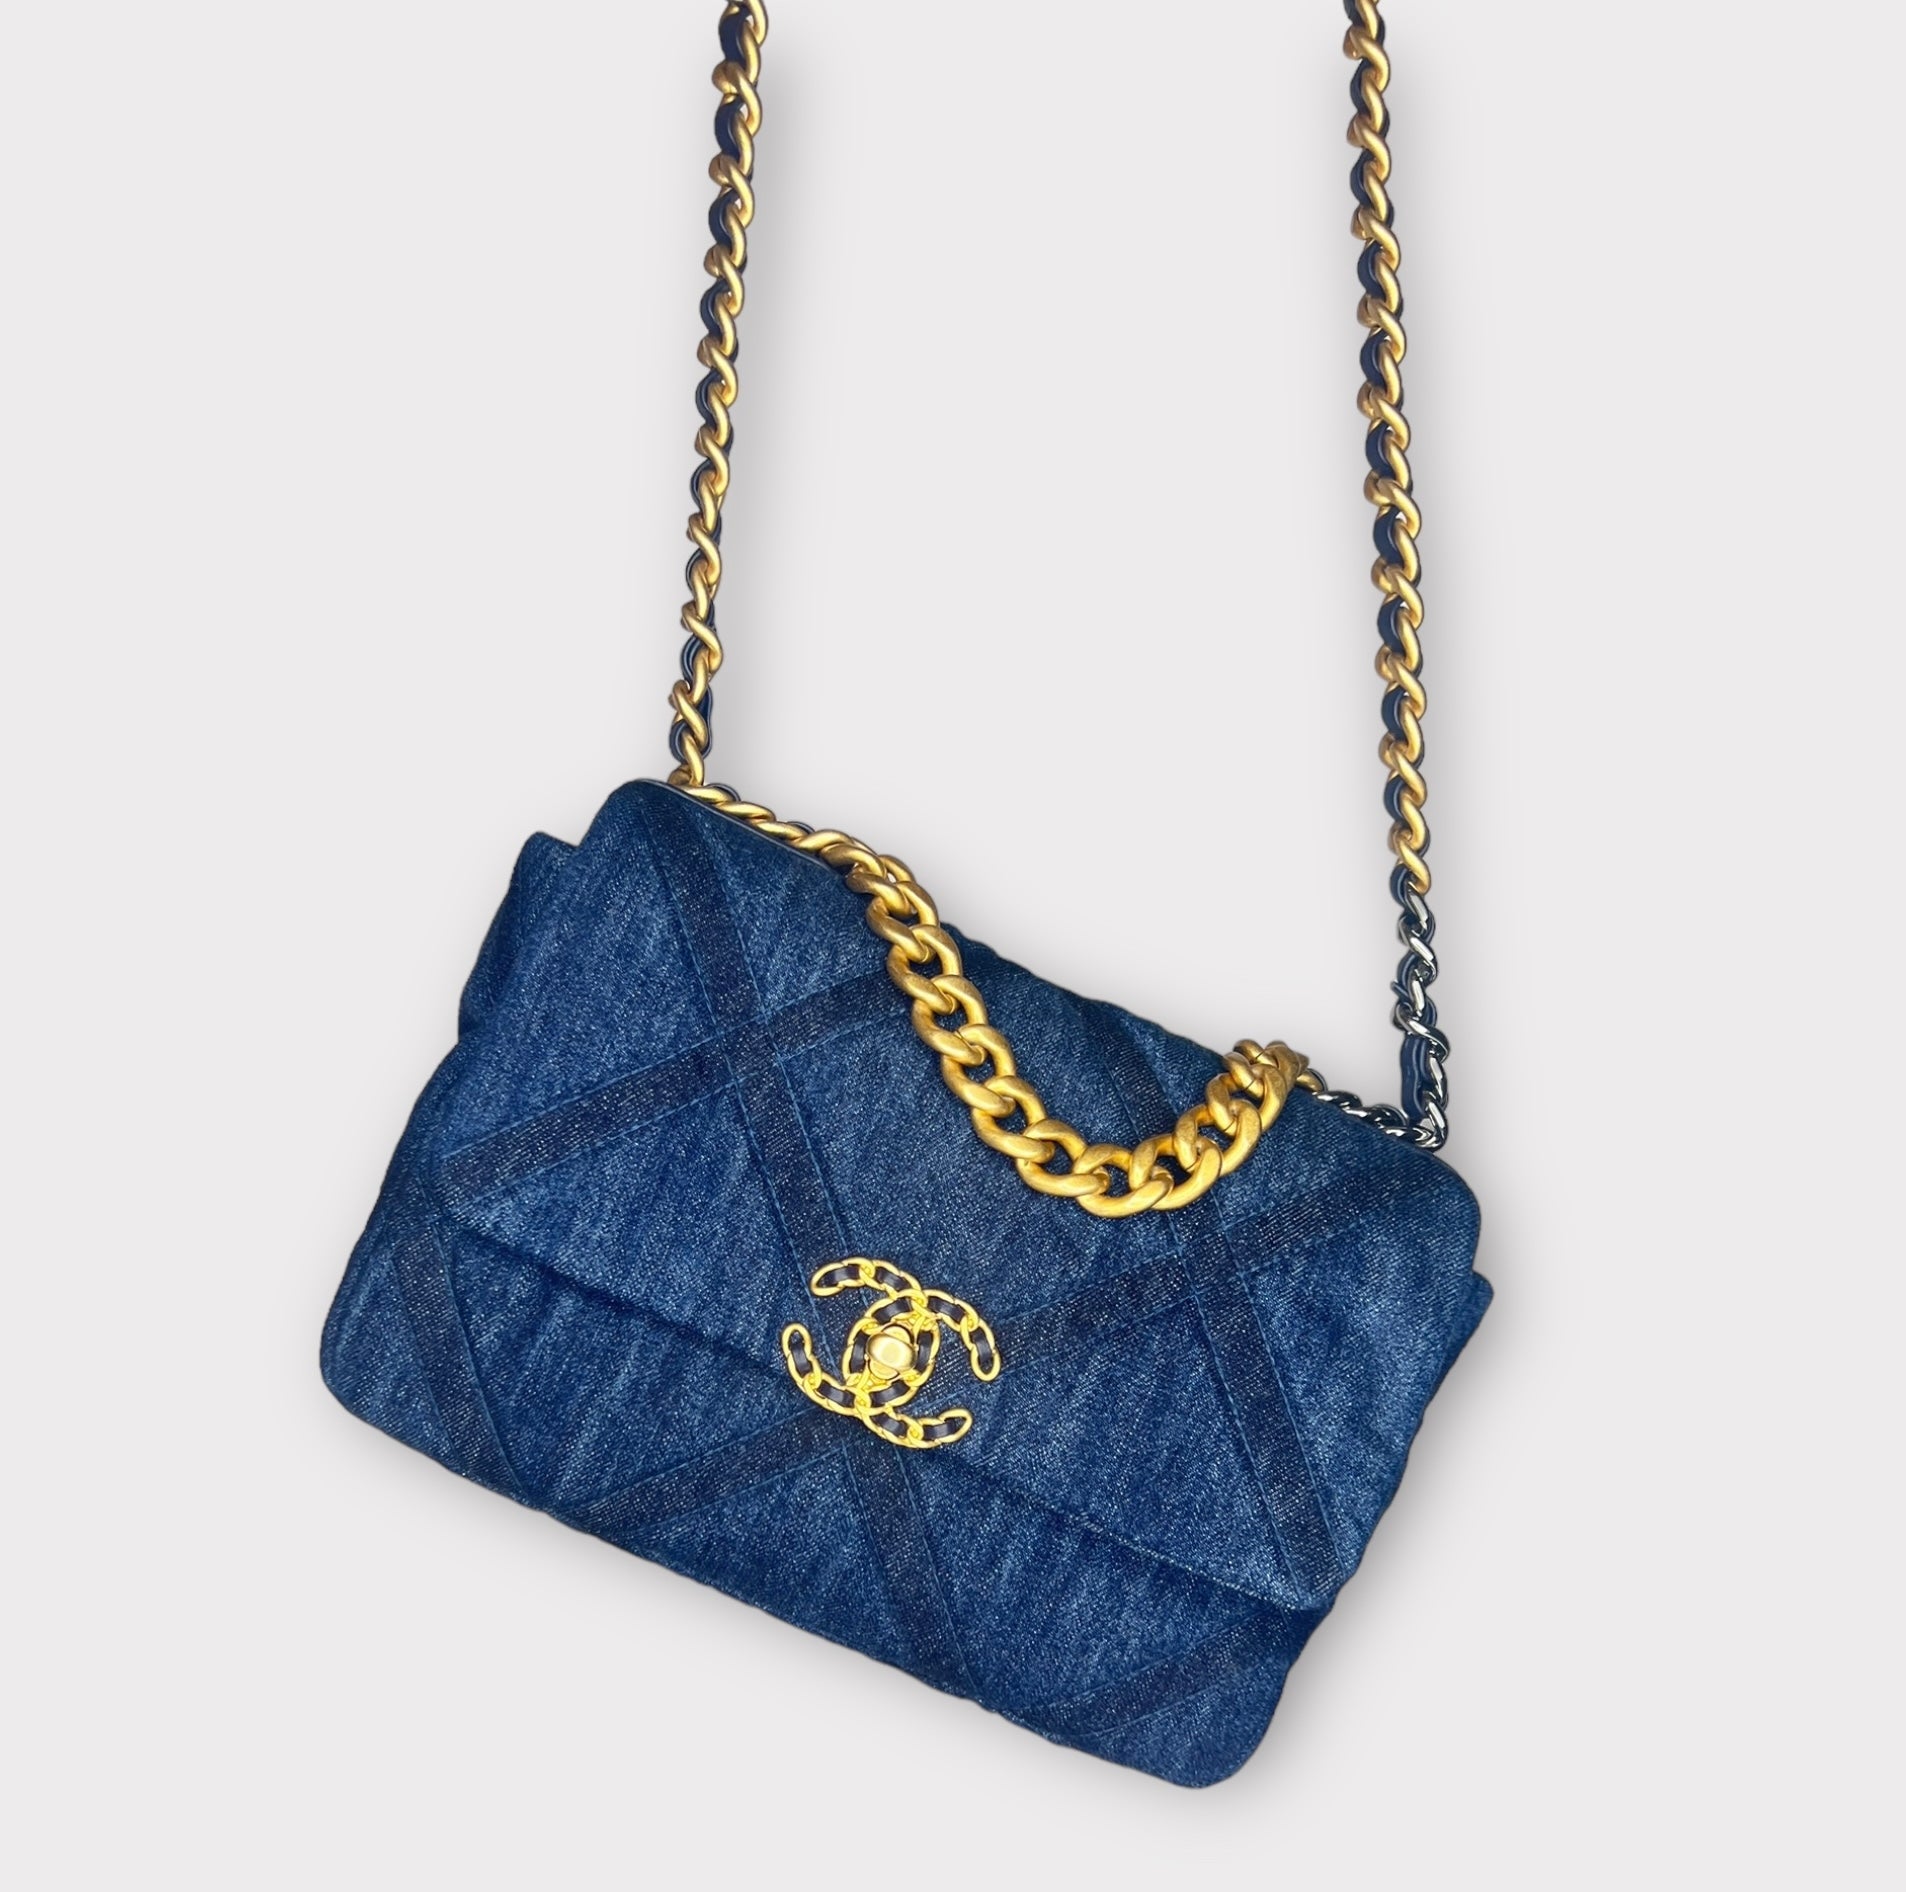 Denim Blue Small Bag with Gold hardware